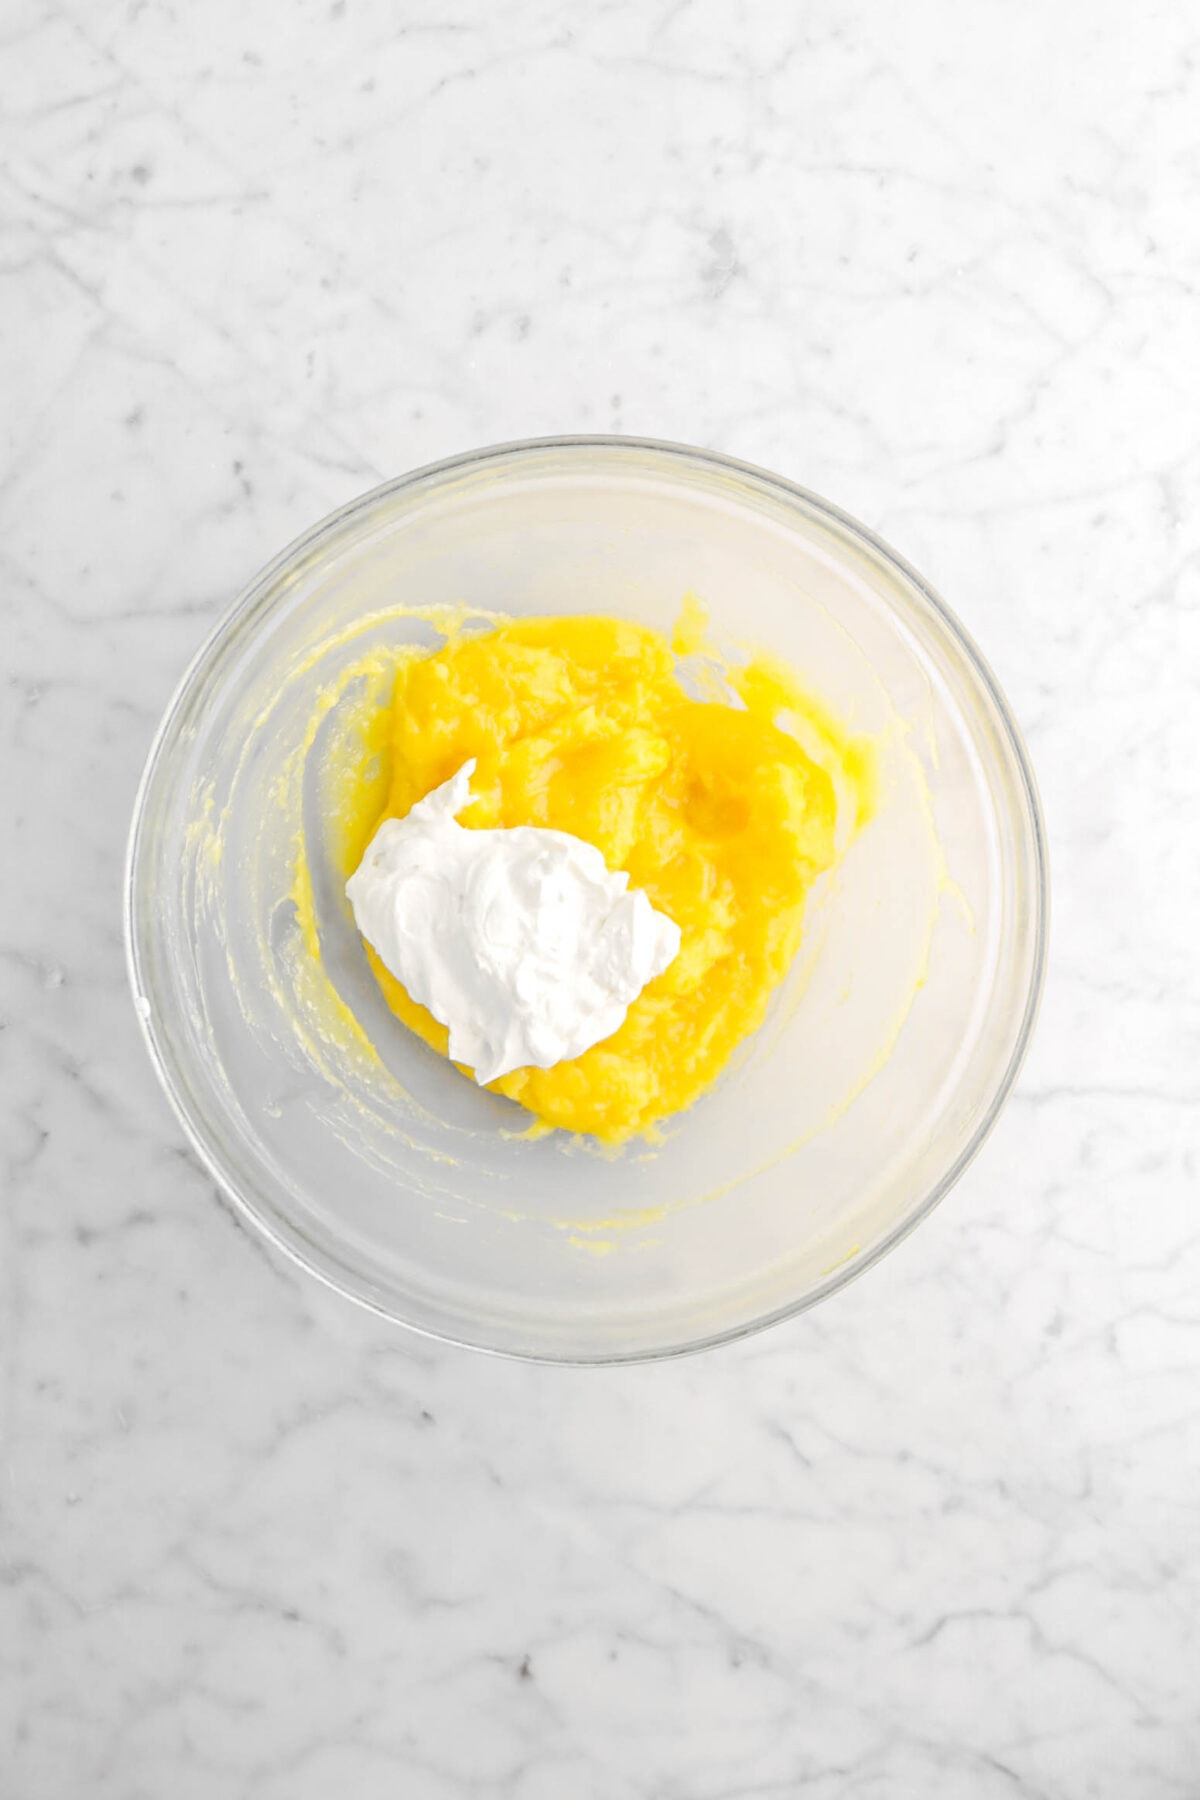 whipped cream and lemon curd in glass bowl